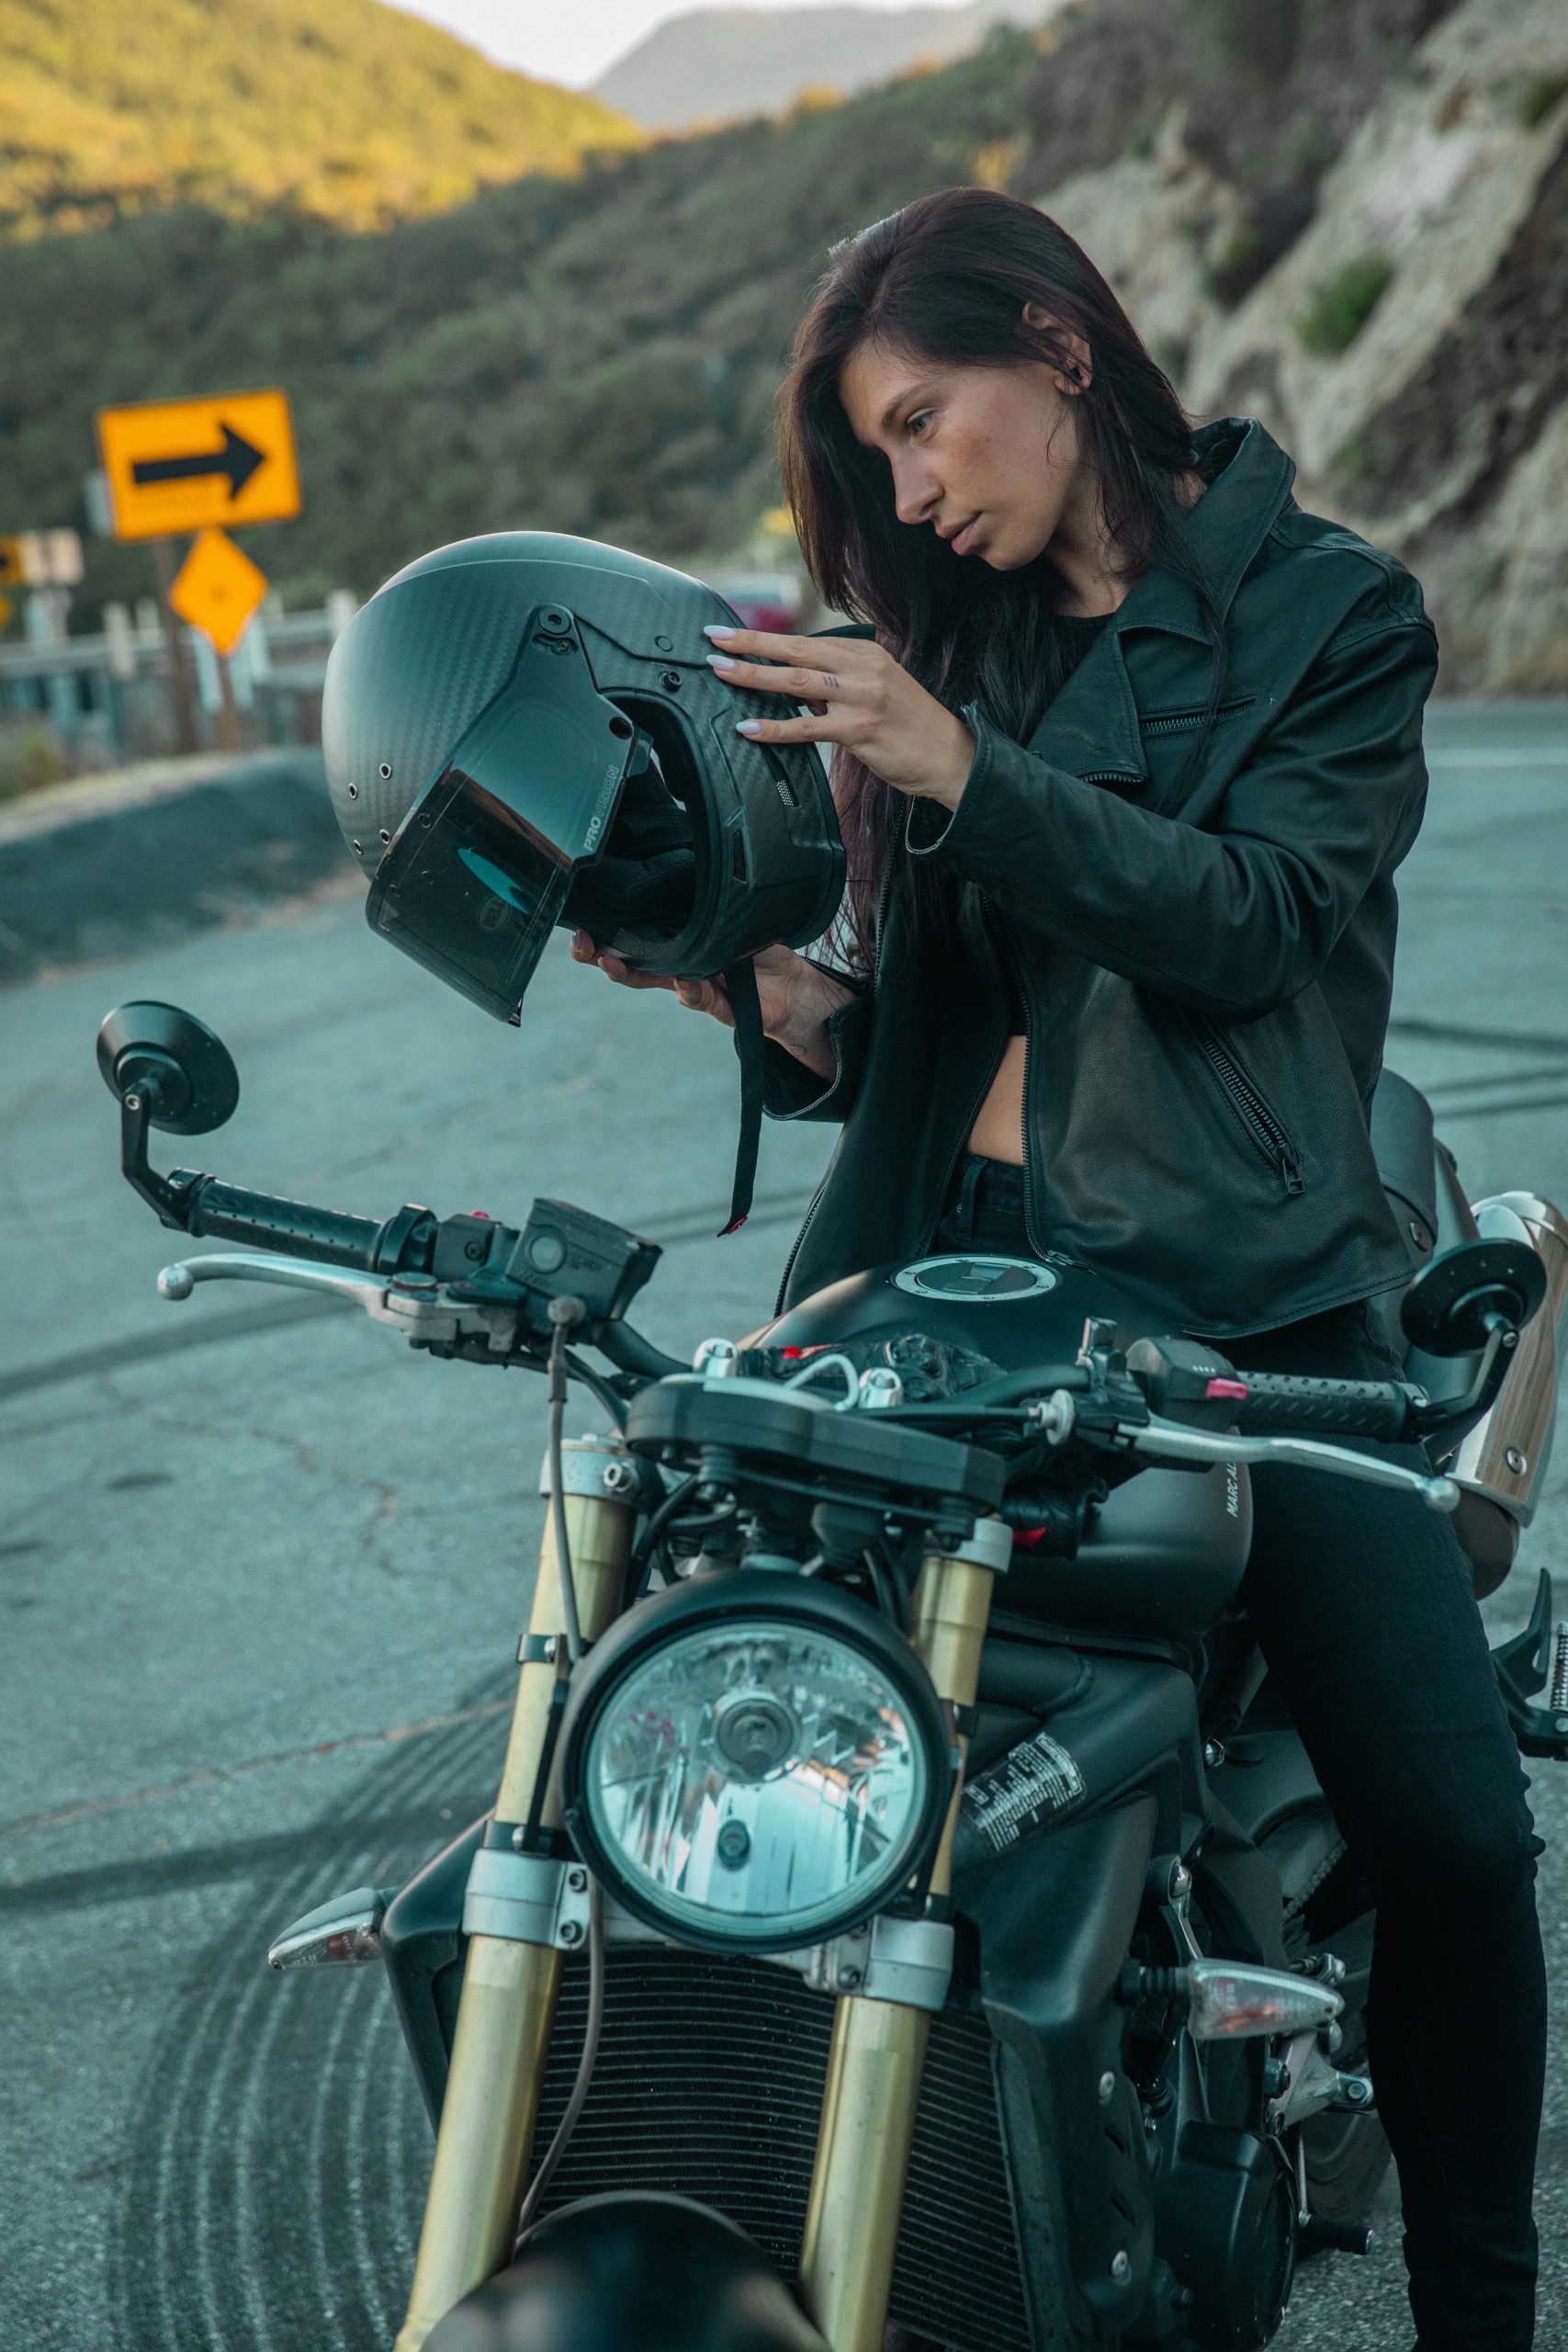 Women’s motorcycle jacket – which one to choose?